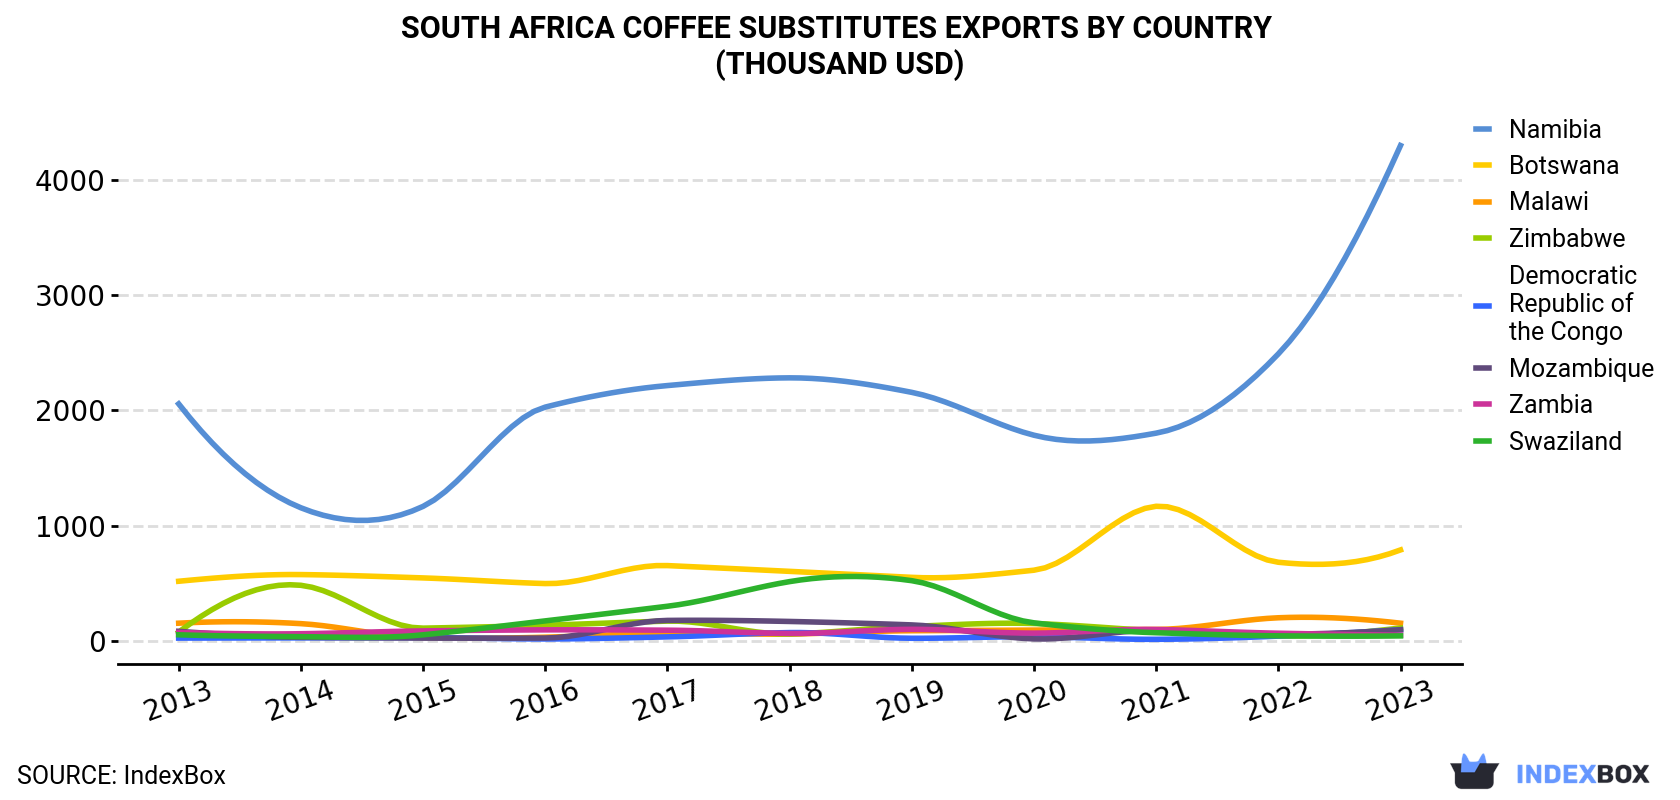 South Africa Coffee Substitutes Exports By Country (Thousand USD)